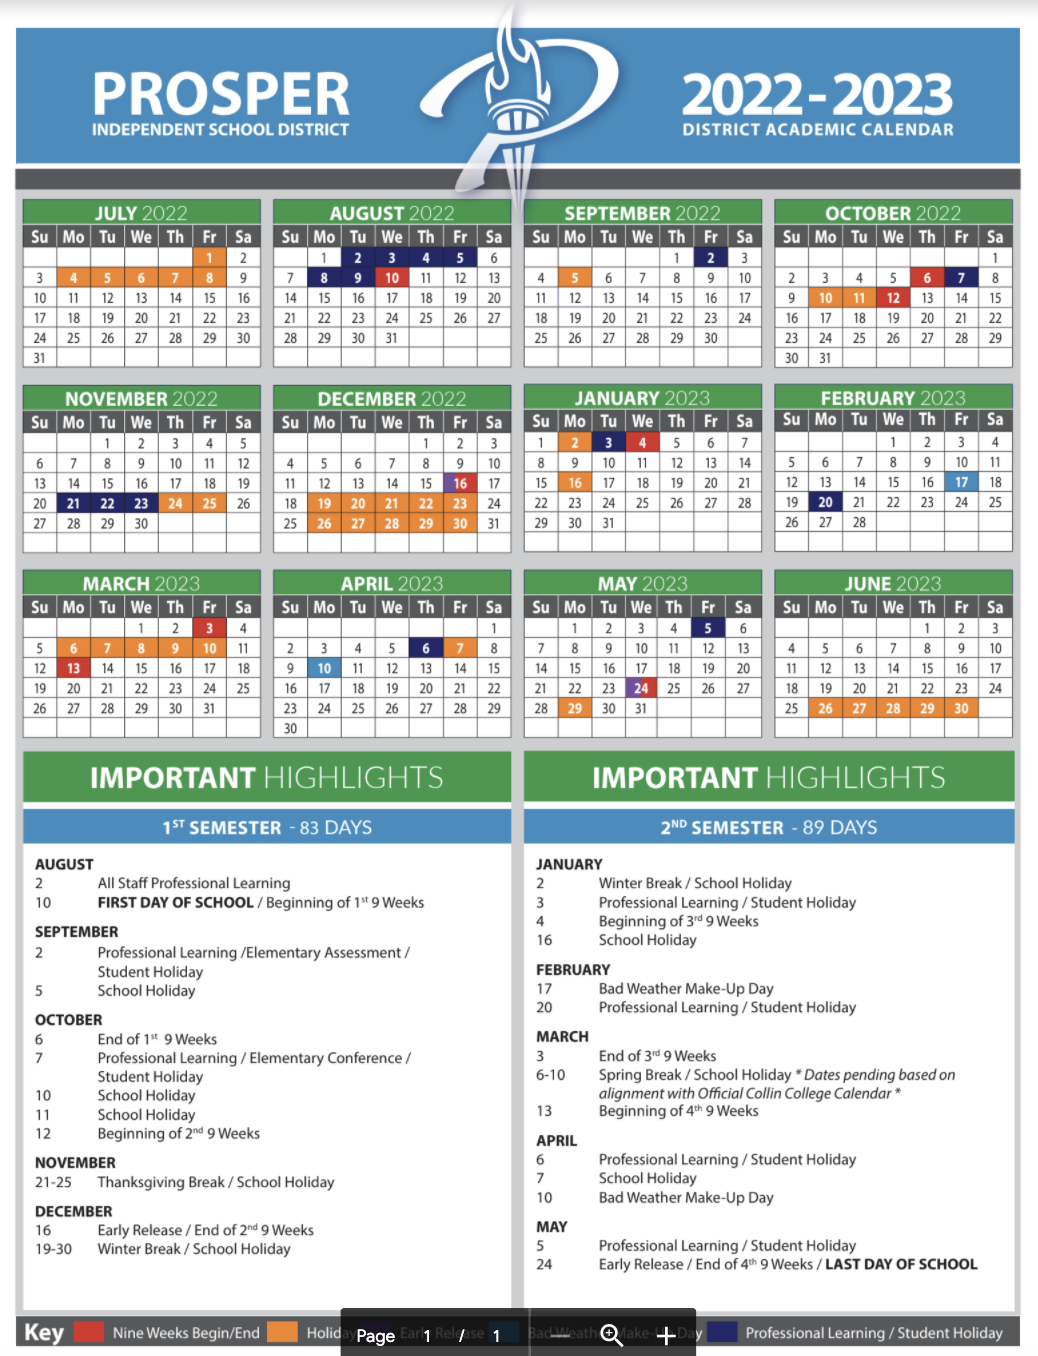 Dallas Isd 2022 2023 Calendar Here Are Prosper Isd's School Calendars For The 2022-2023 And The 2023-2024  School Years | Cities | Checkoutdfw.com